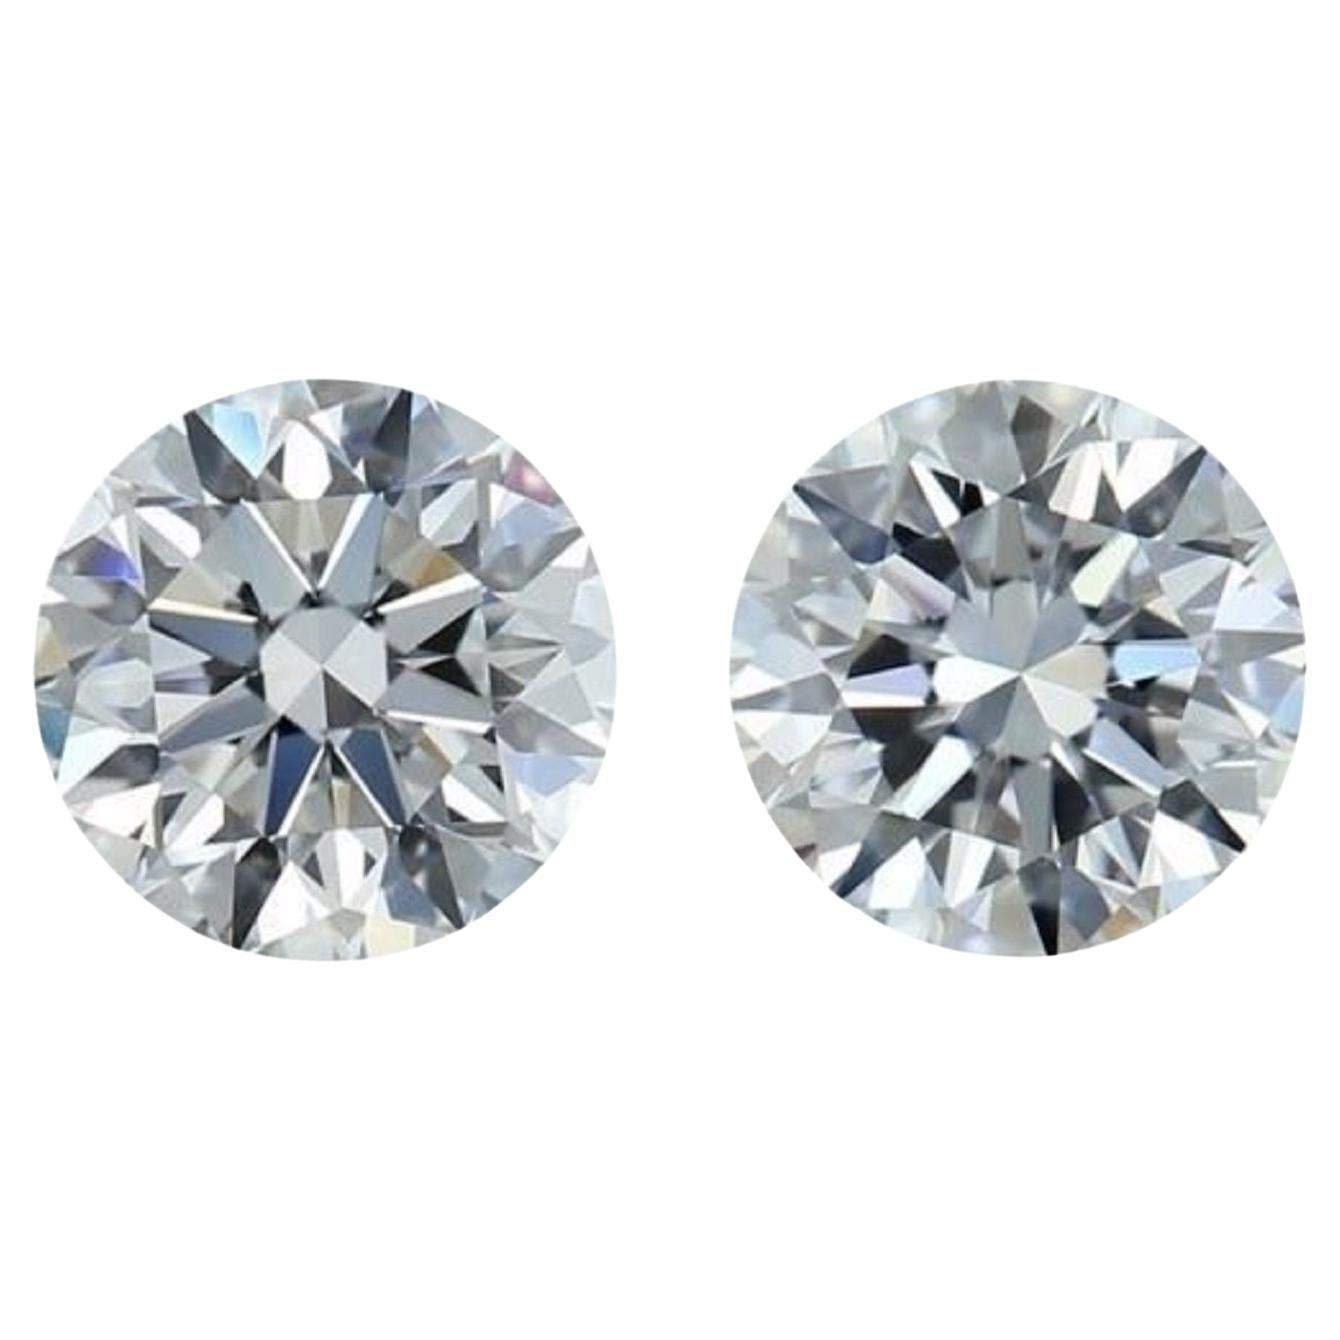 Dazzling 2 Pcs Flawless Natural Diamonds with 1.43ct Round D IF IGI Certificate